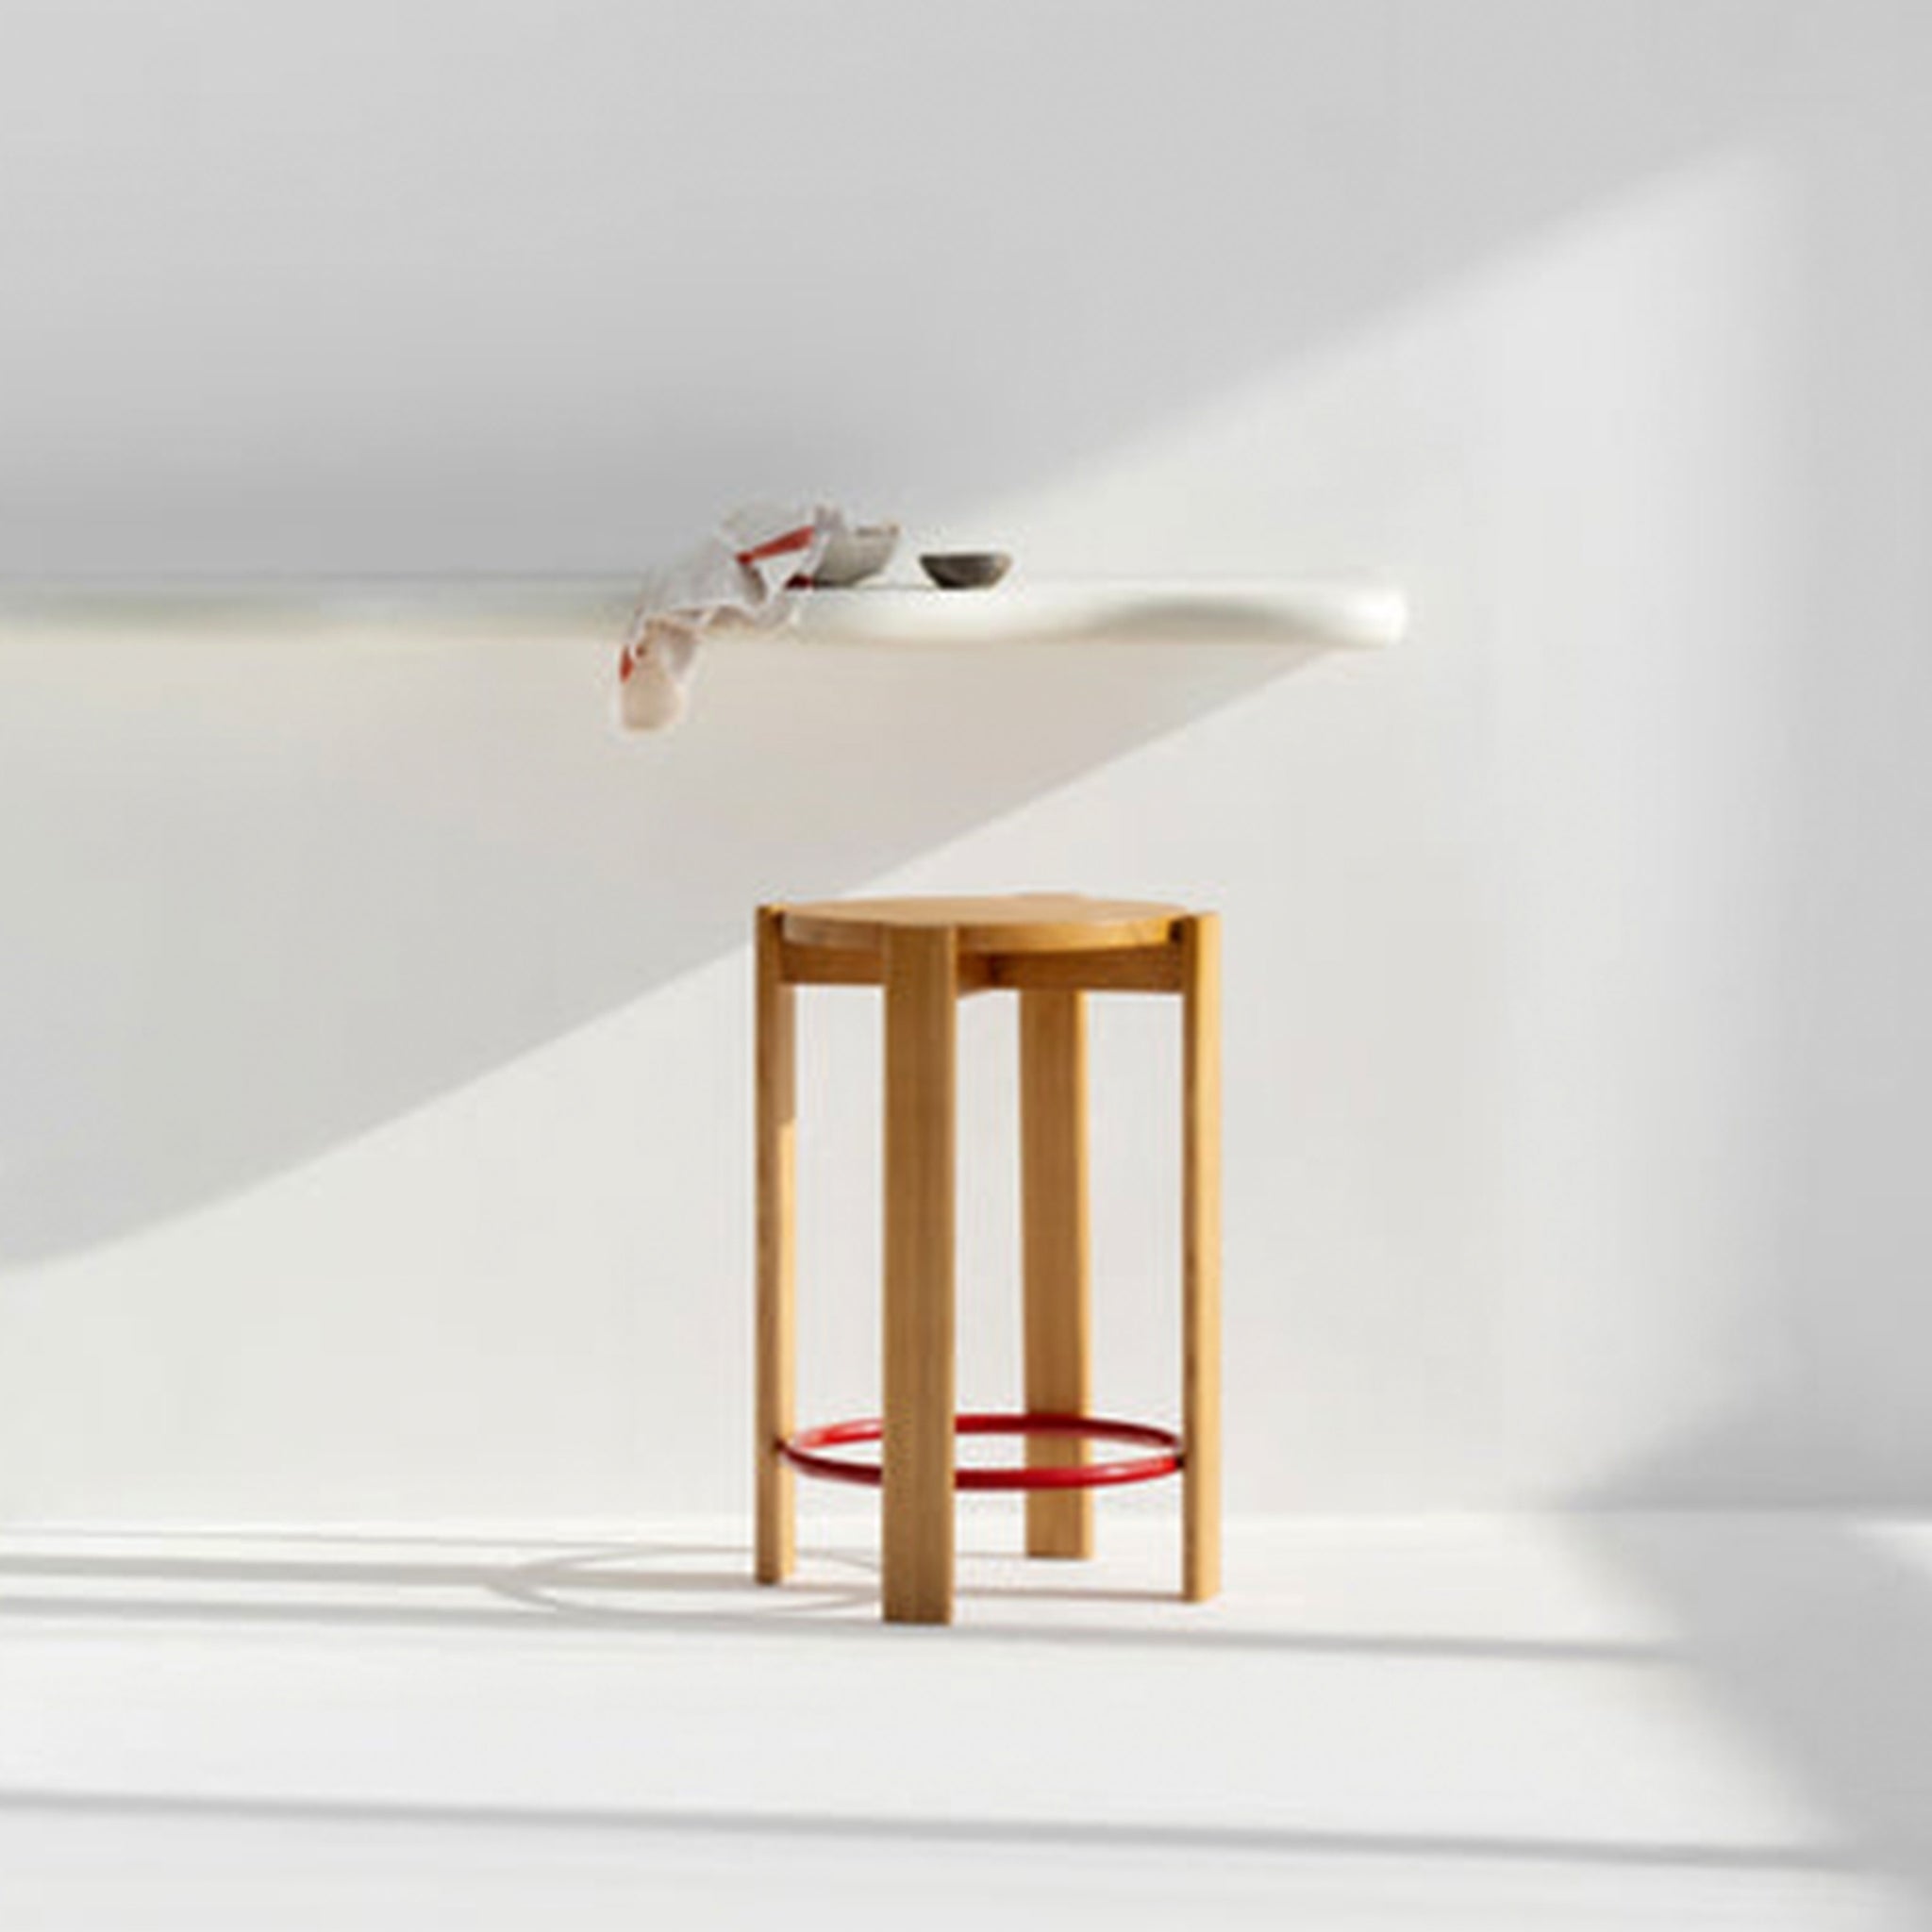 Wooden bar stool with a red circular footrest placed in a bright, minimalist kitchen